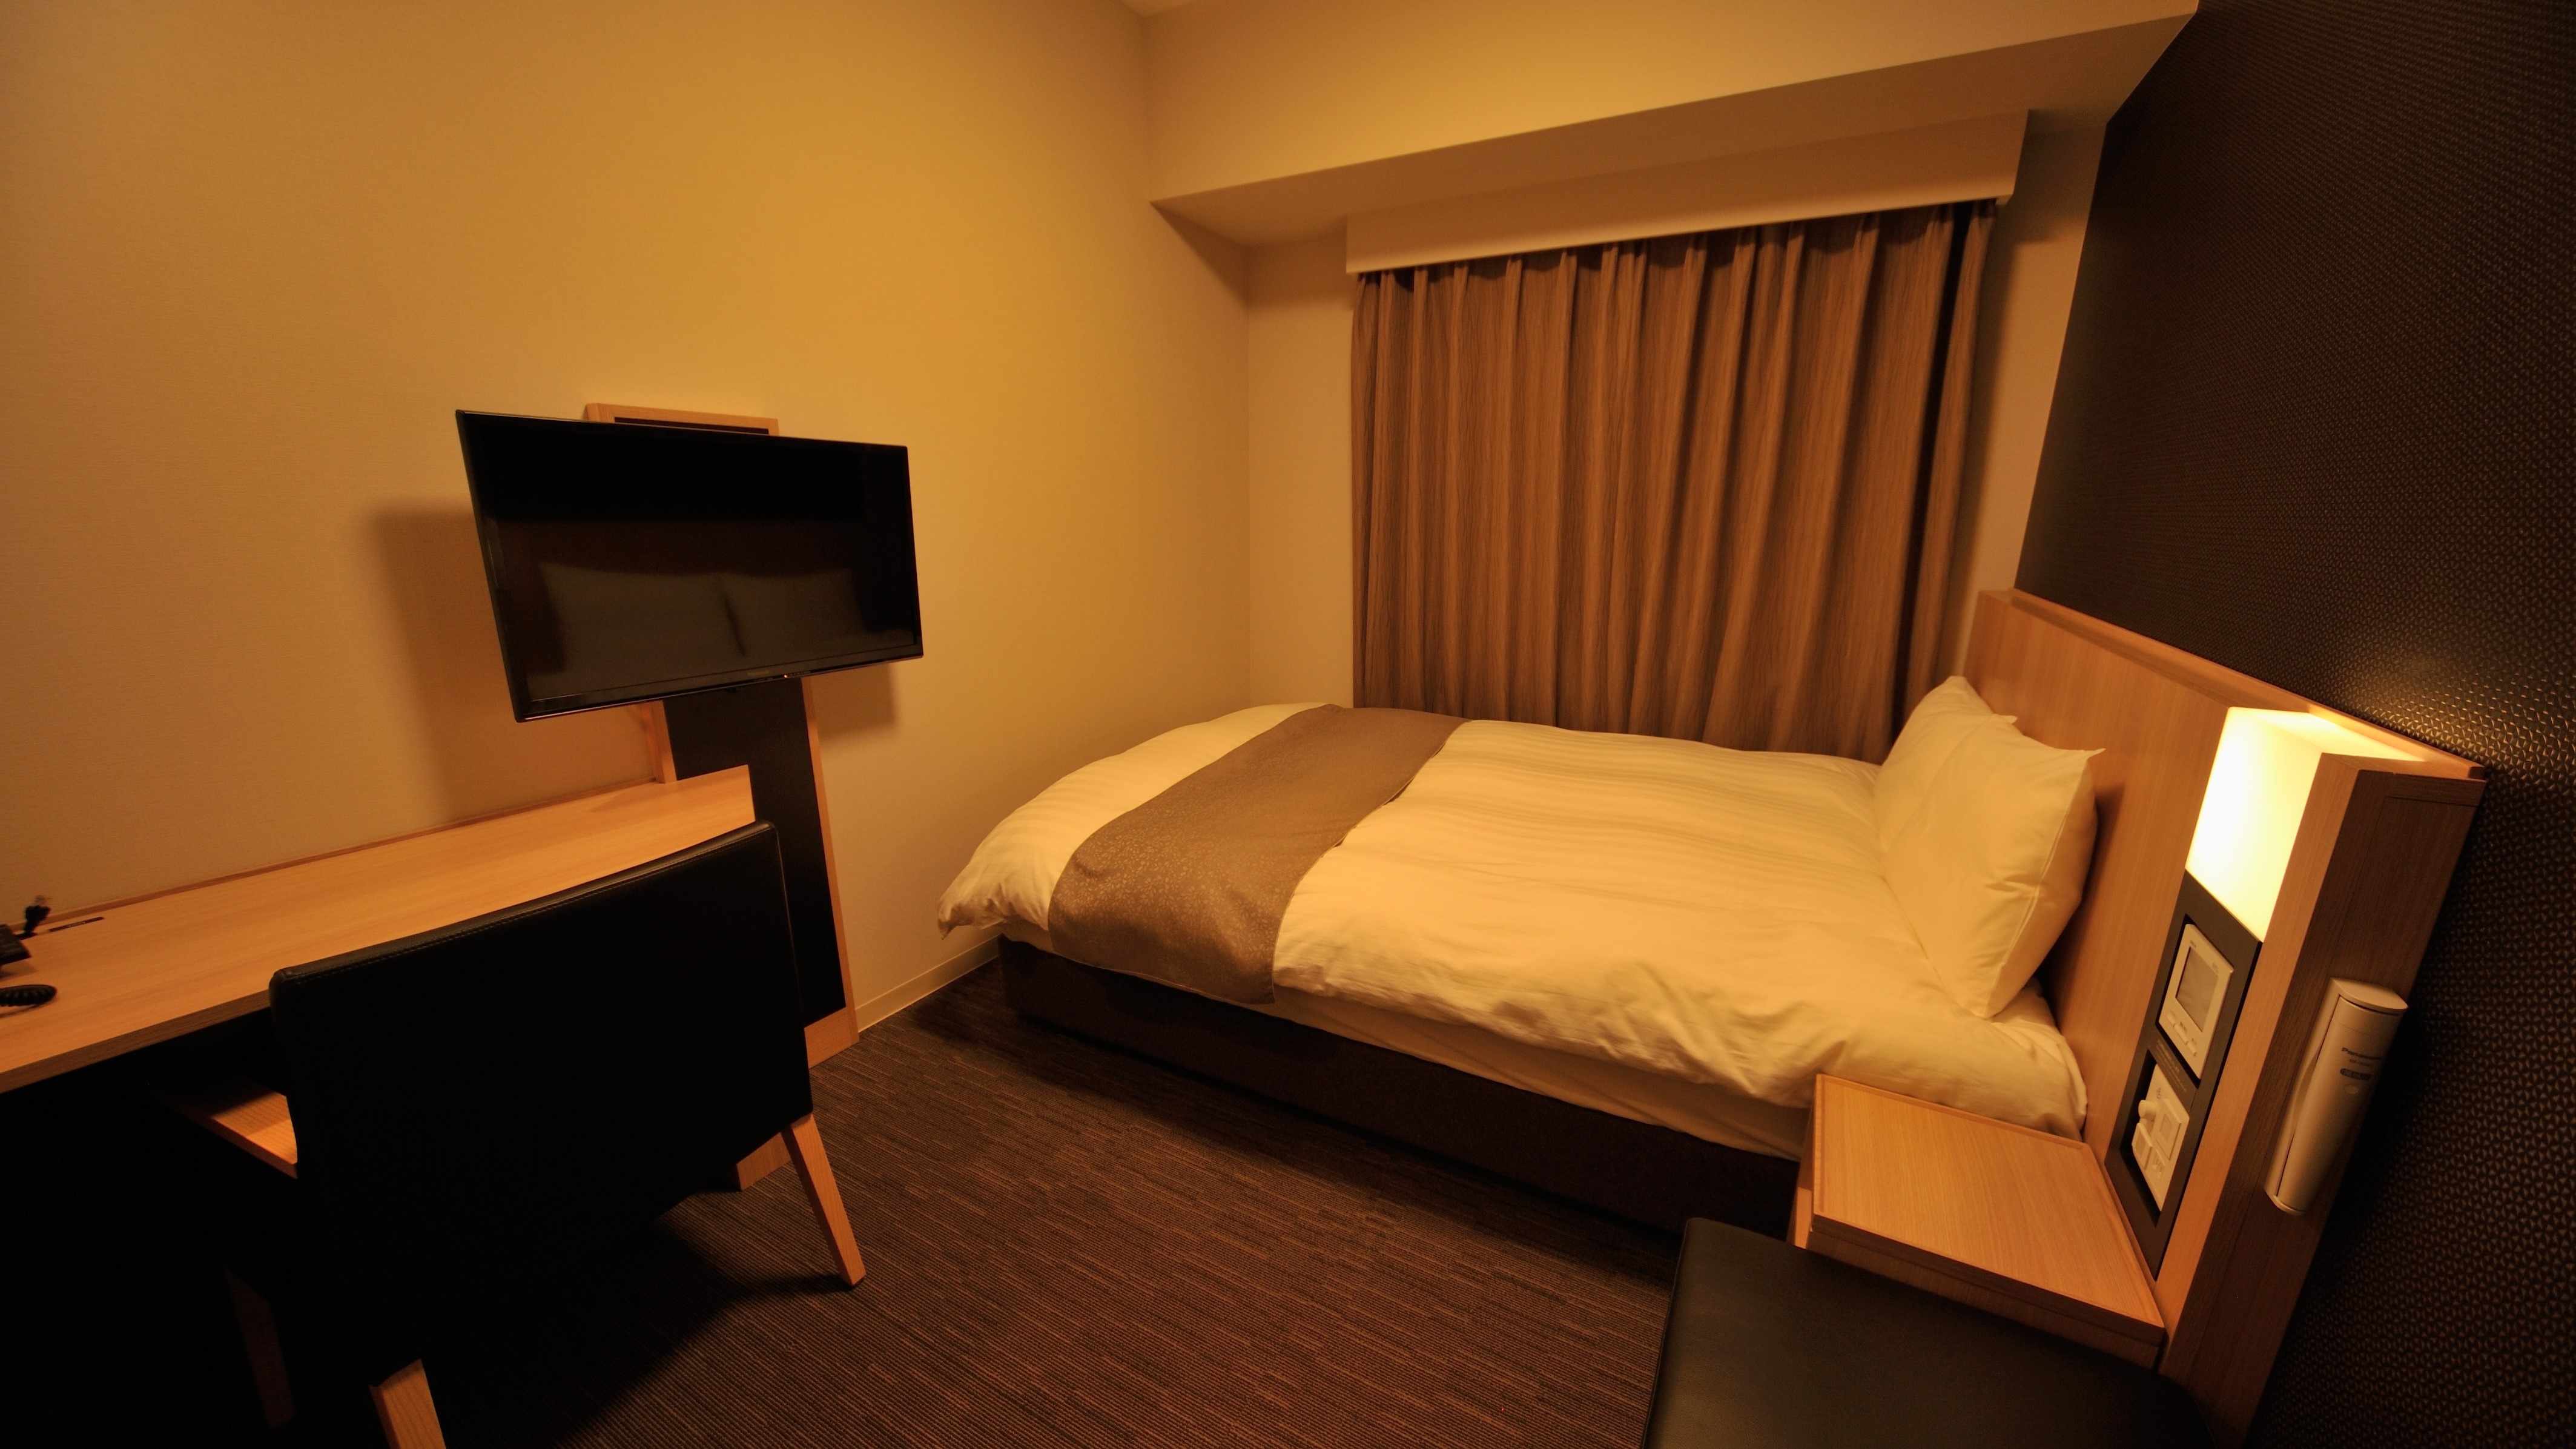 ◆ Double room [No smoking / Smoking] 13.8 to 14.9 square meters Bed size 140 & times; 195 cm